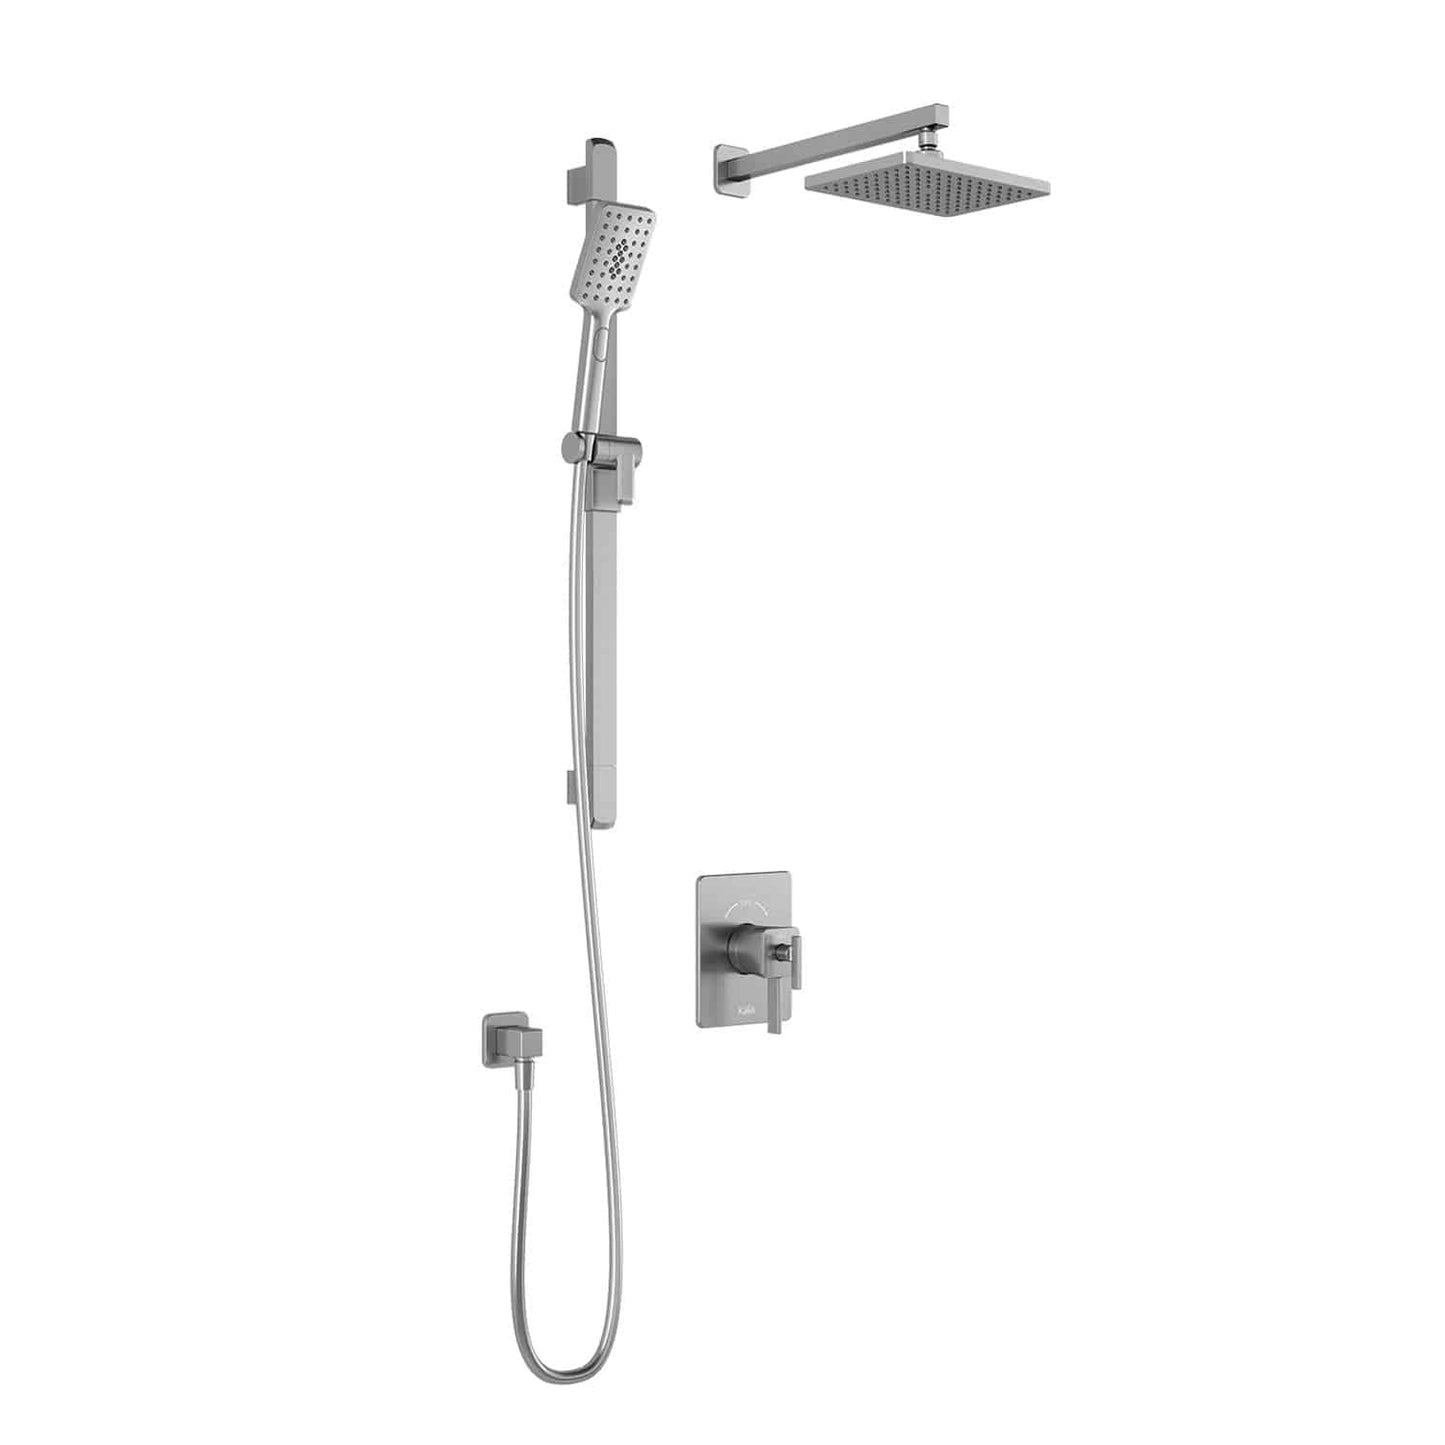 Kalia SquareOne TCD1 AQUATONIK T/P Coaxial Shower System with 10-1/4" Shower Head Wall Arm- Pure Nickel PVD